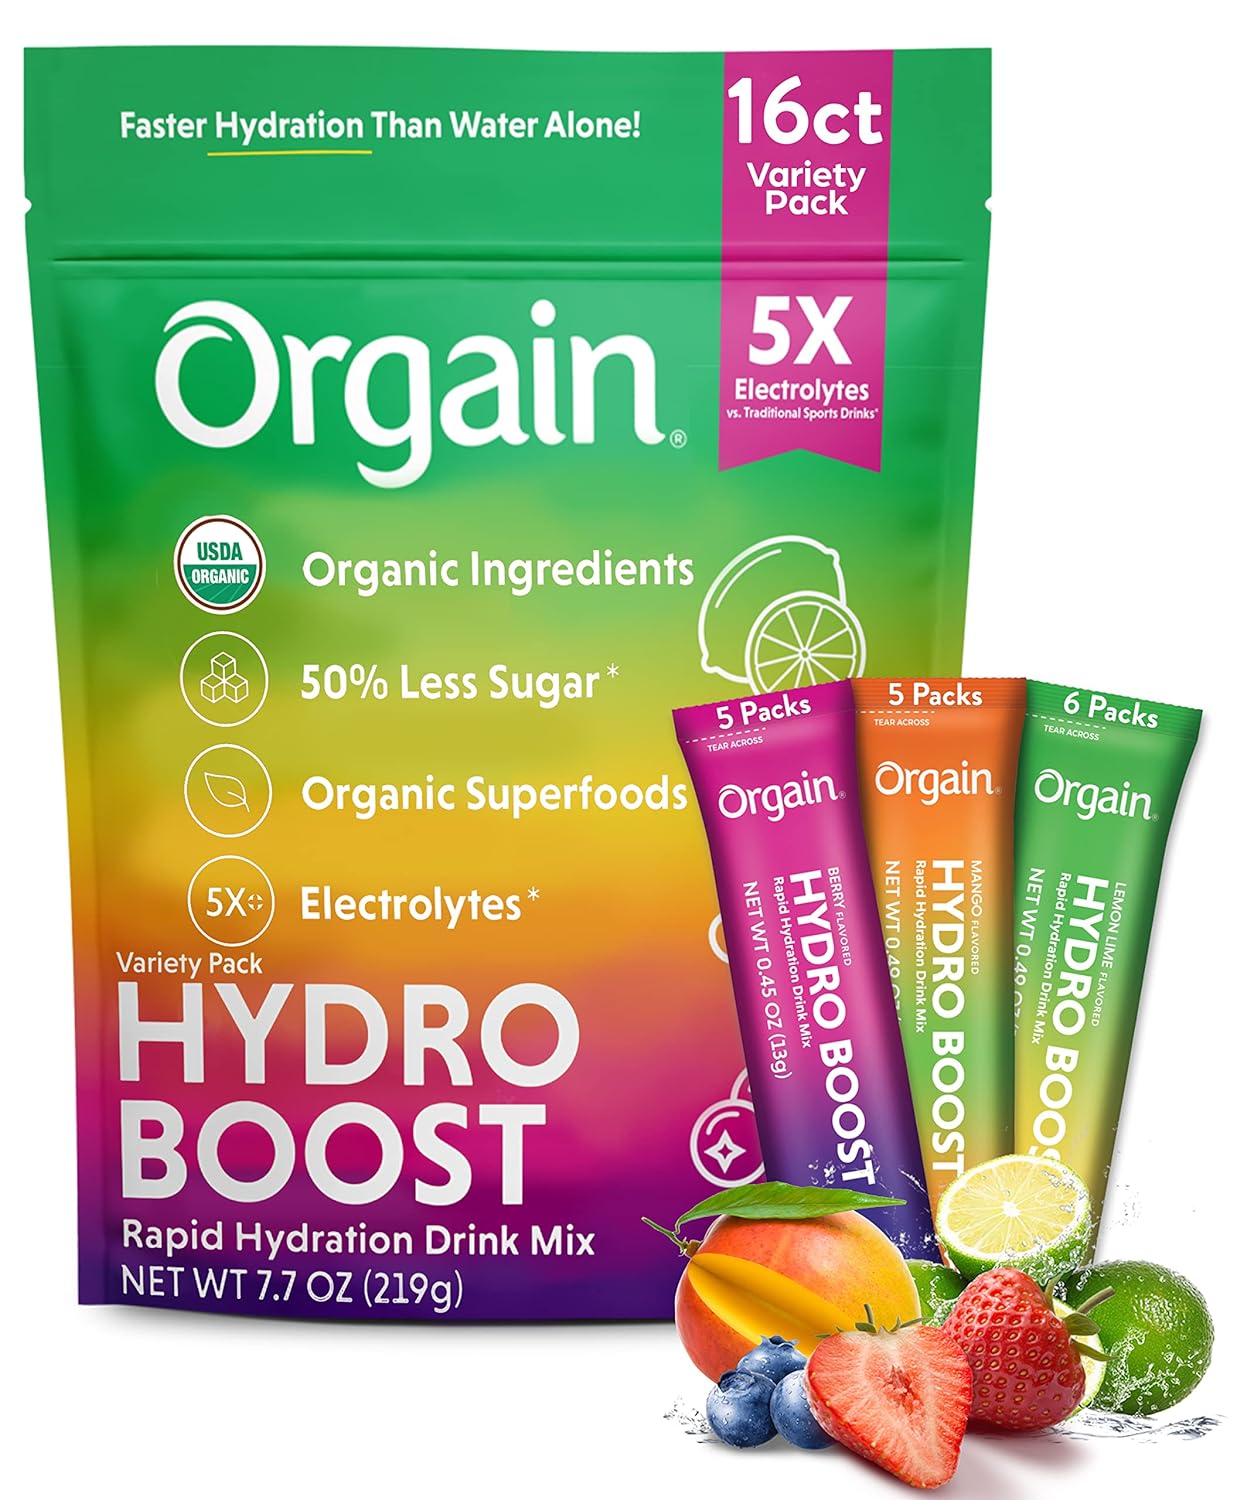 Orgain Organic Hydration Packets, Electrolytes Powder - Variety Pack Hydro Boost with Superfoods, Gluten-Free, Soy Free, Vegan, Non GMO, Less Sugar than Sports Drinks, Travel Packets, 16 Count